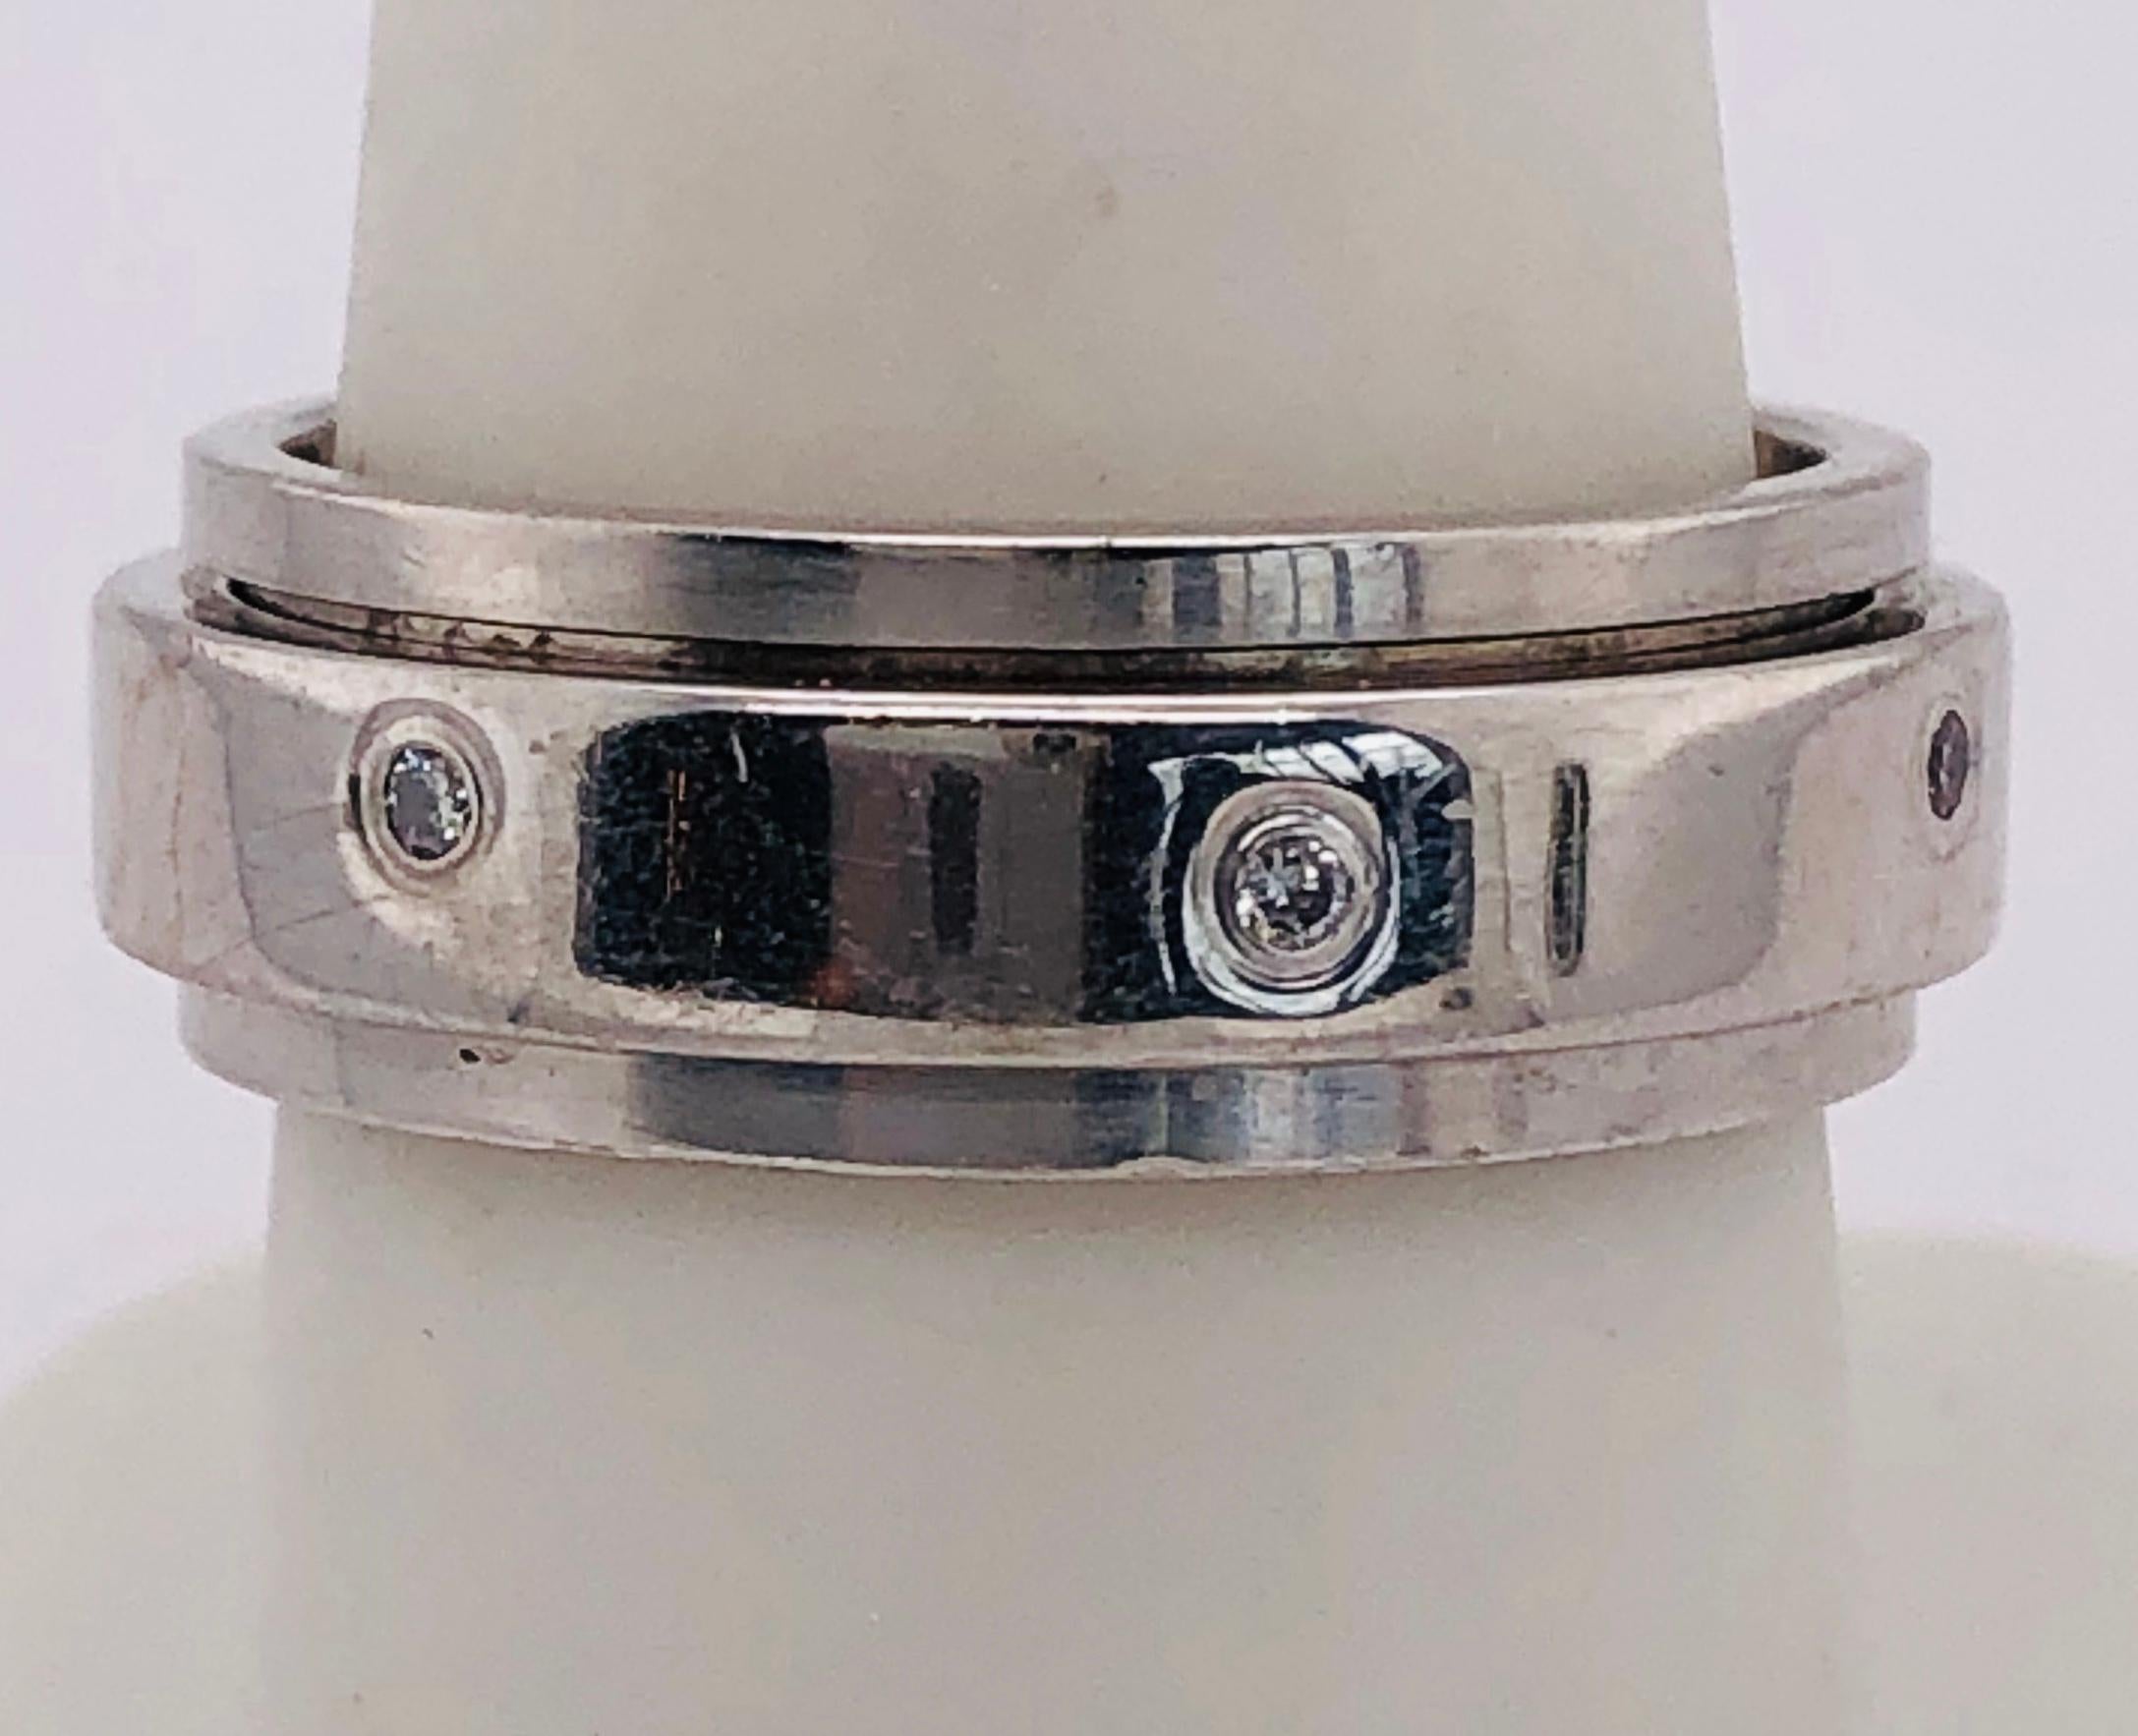 18 Kt White Gold Luxury Piaget Wedding Ring with Diamonds
Size 8 with 9.9 grams total weight.
In 1874, at the age of nineteen, Georges-Édouard Piaget set up his first workshop on the family farm where he devoted himself to the manufacture of